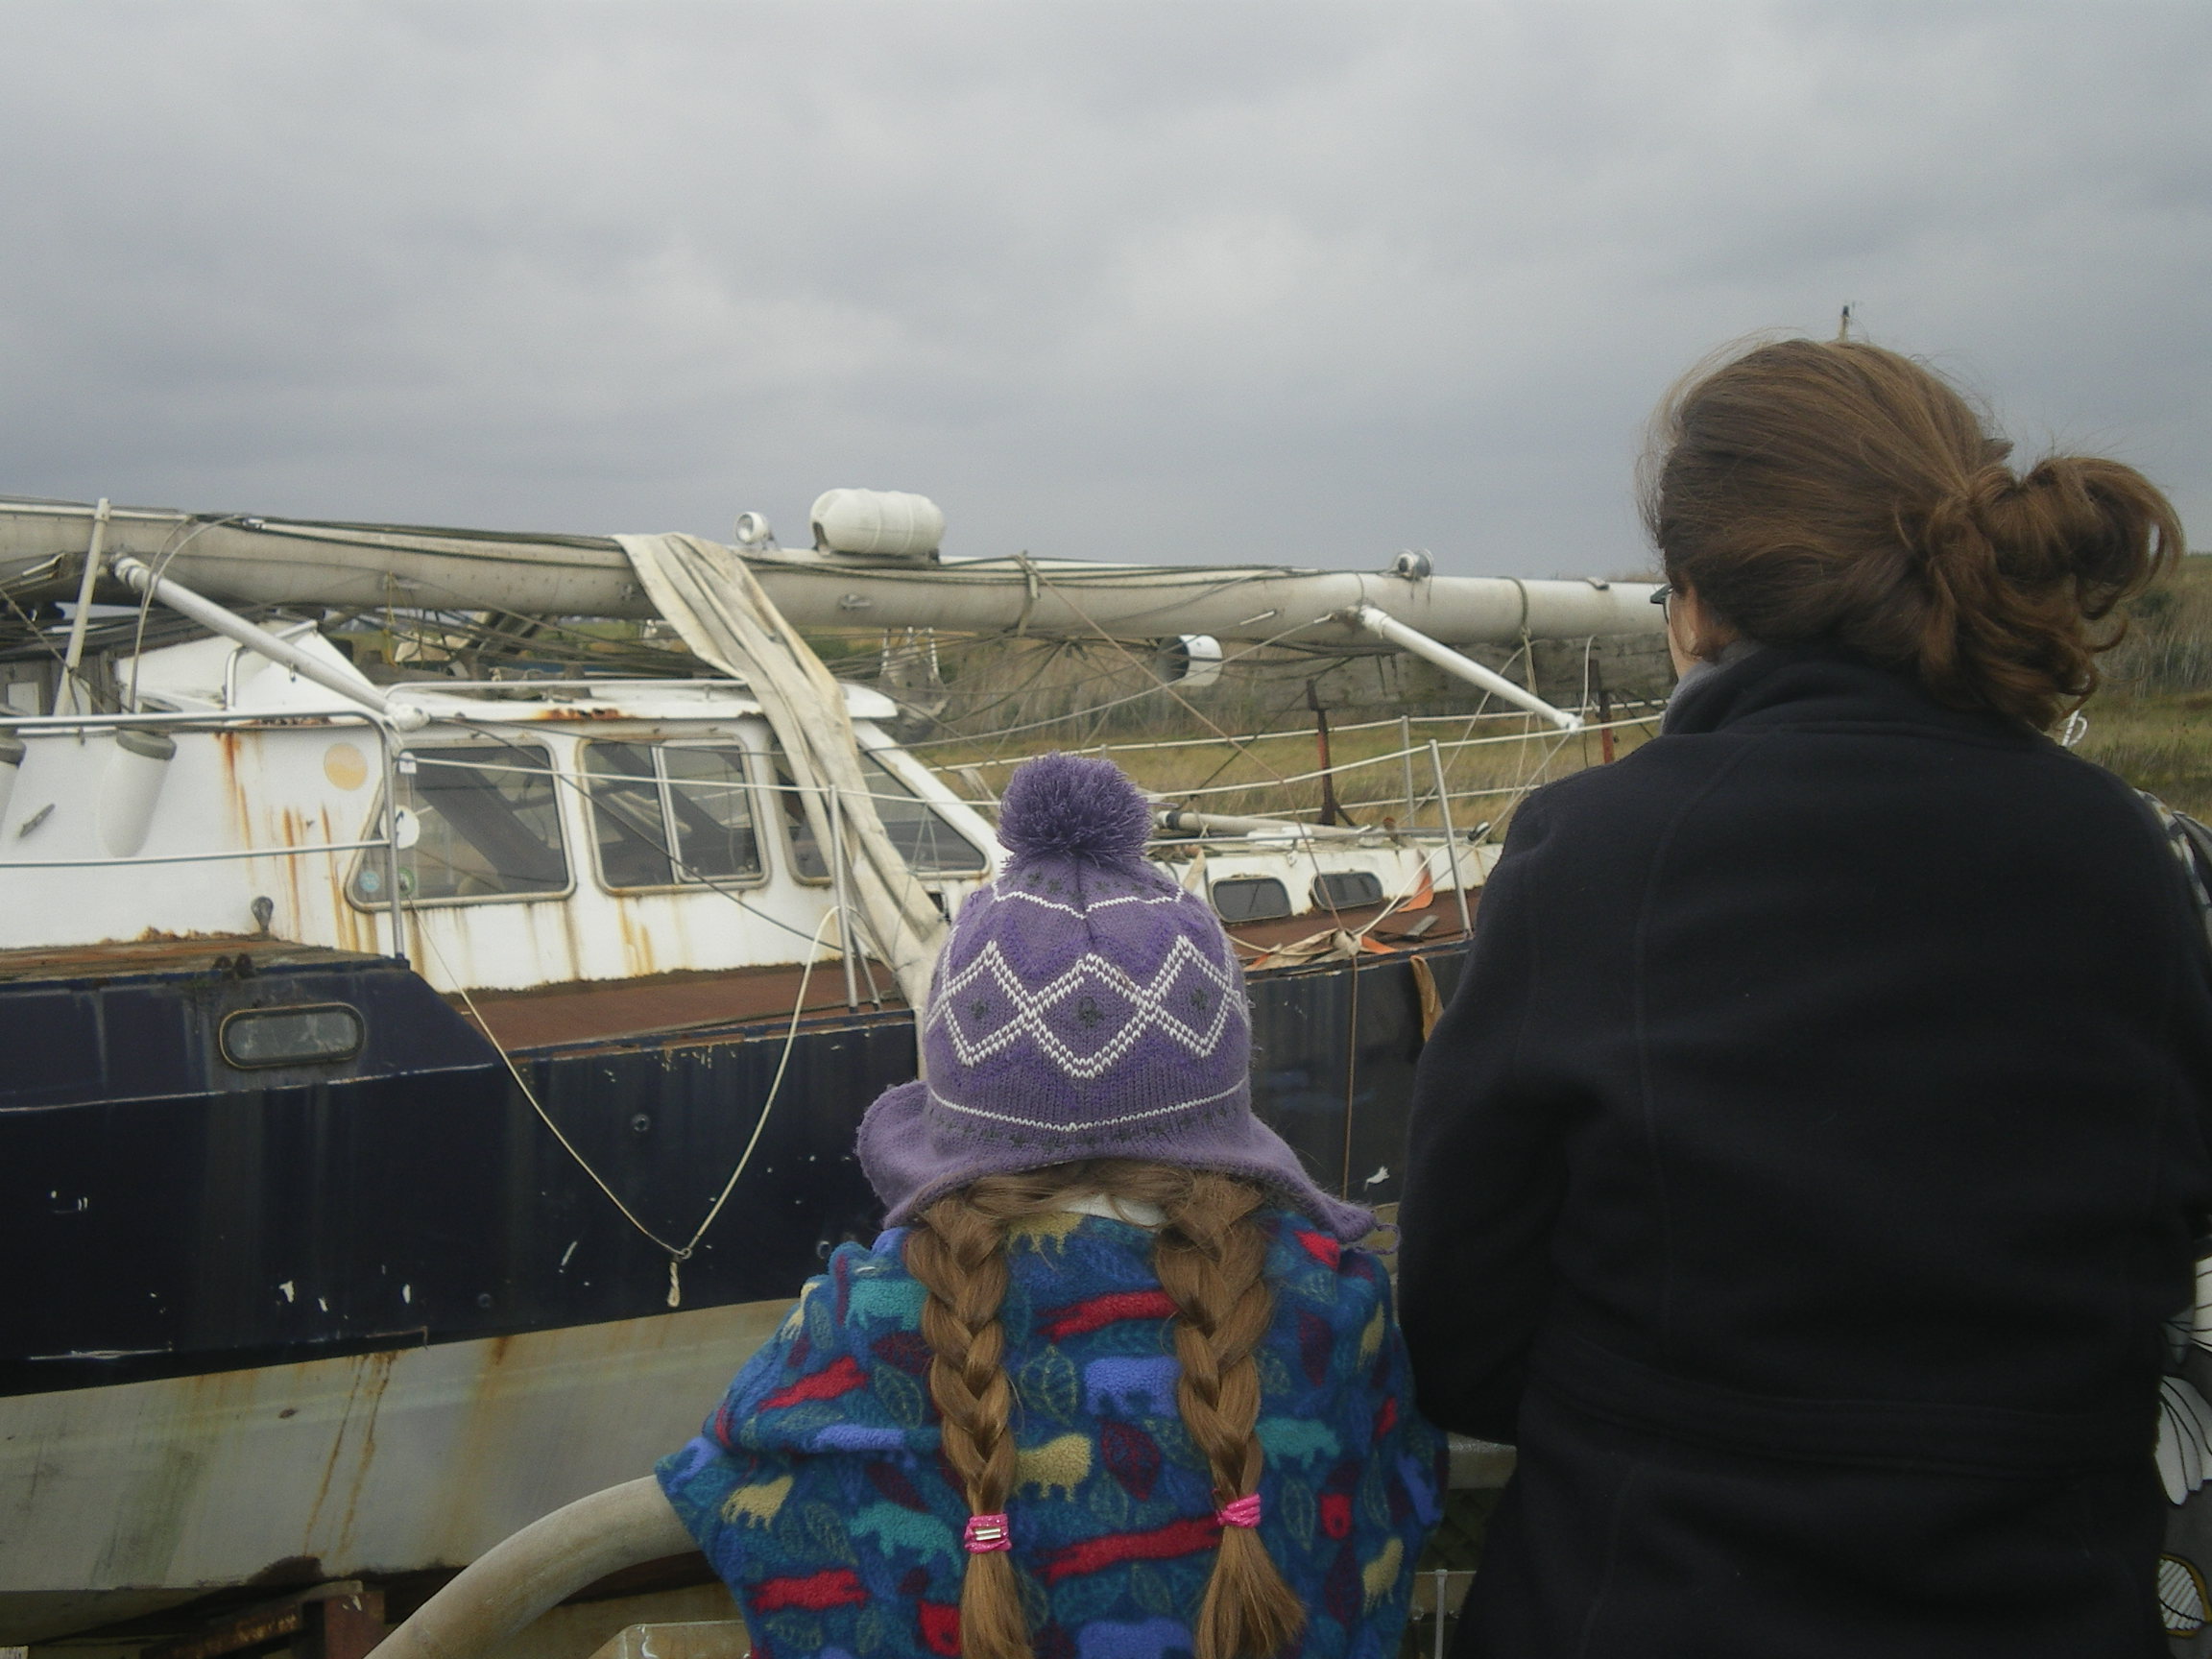 Boats in the mud at Canvey Island, Essex: the girls were 9 and 12 and 